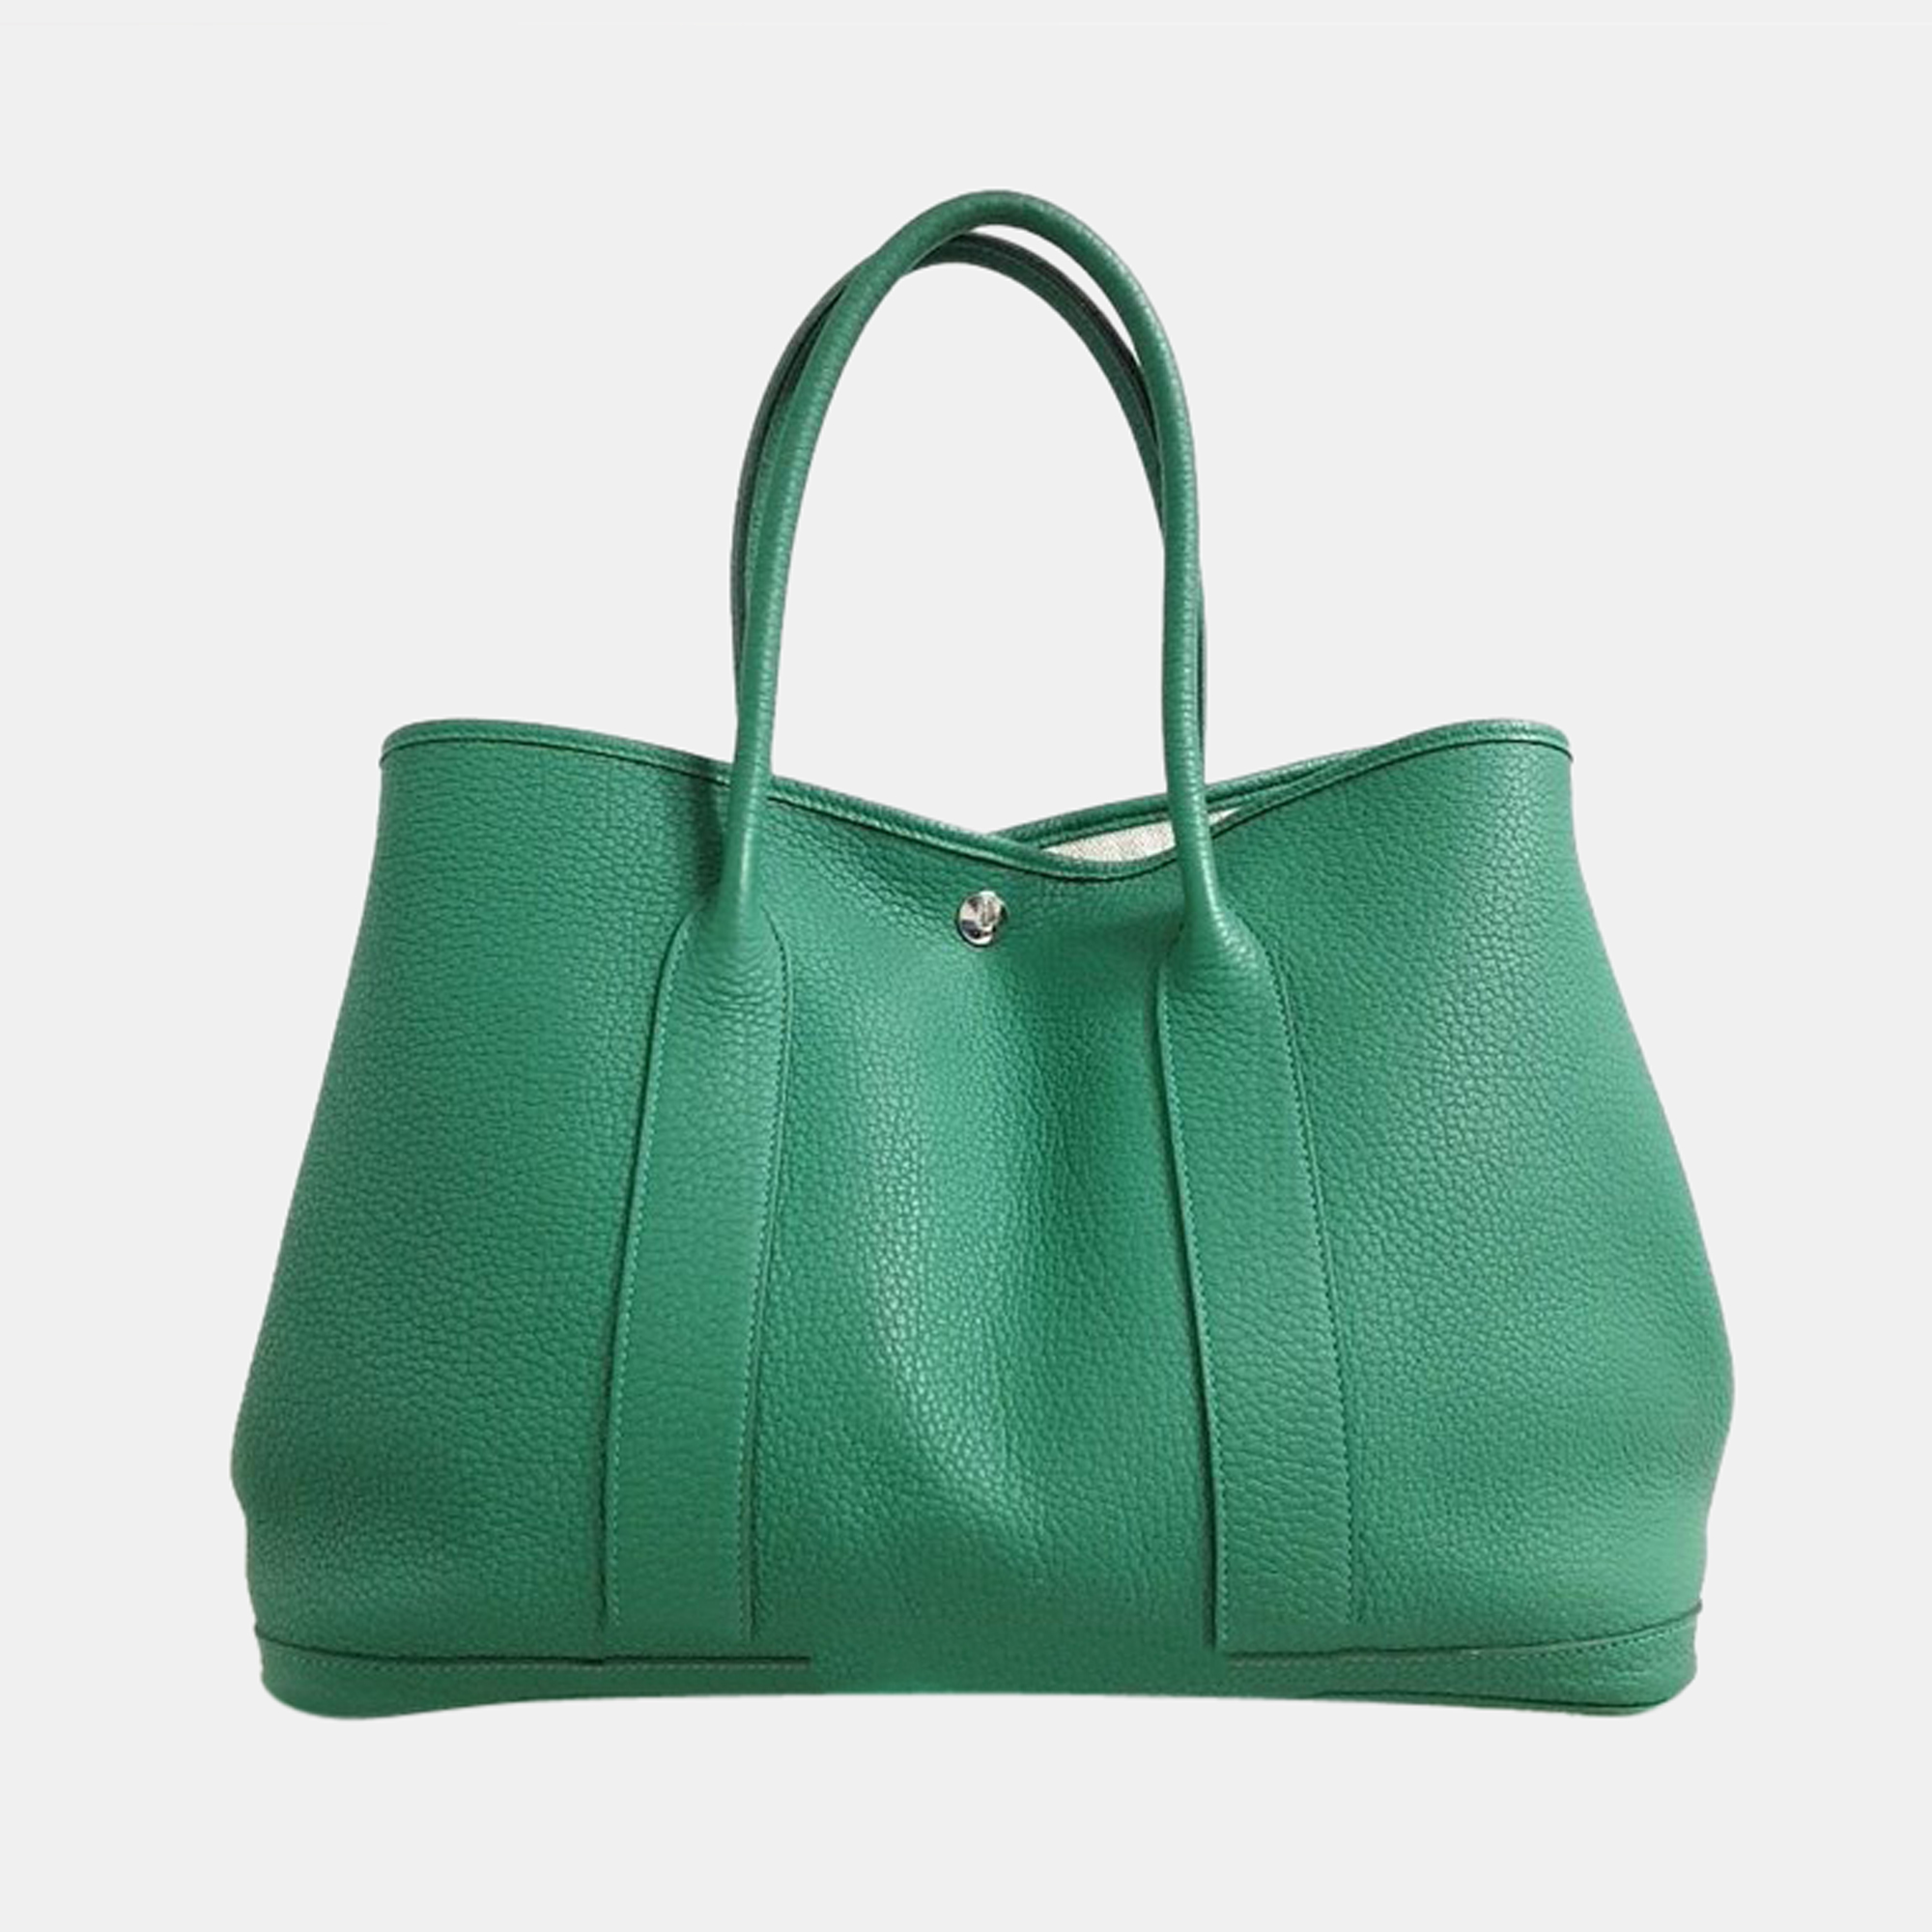 Hermes Green Leather Garden Party 36 Tote Bag Hermes